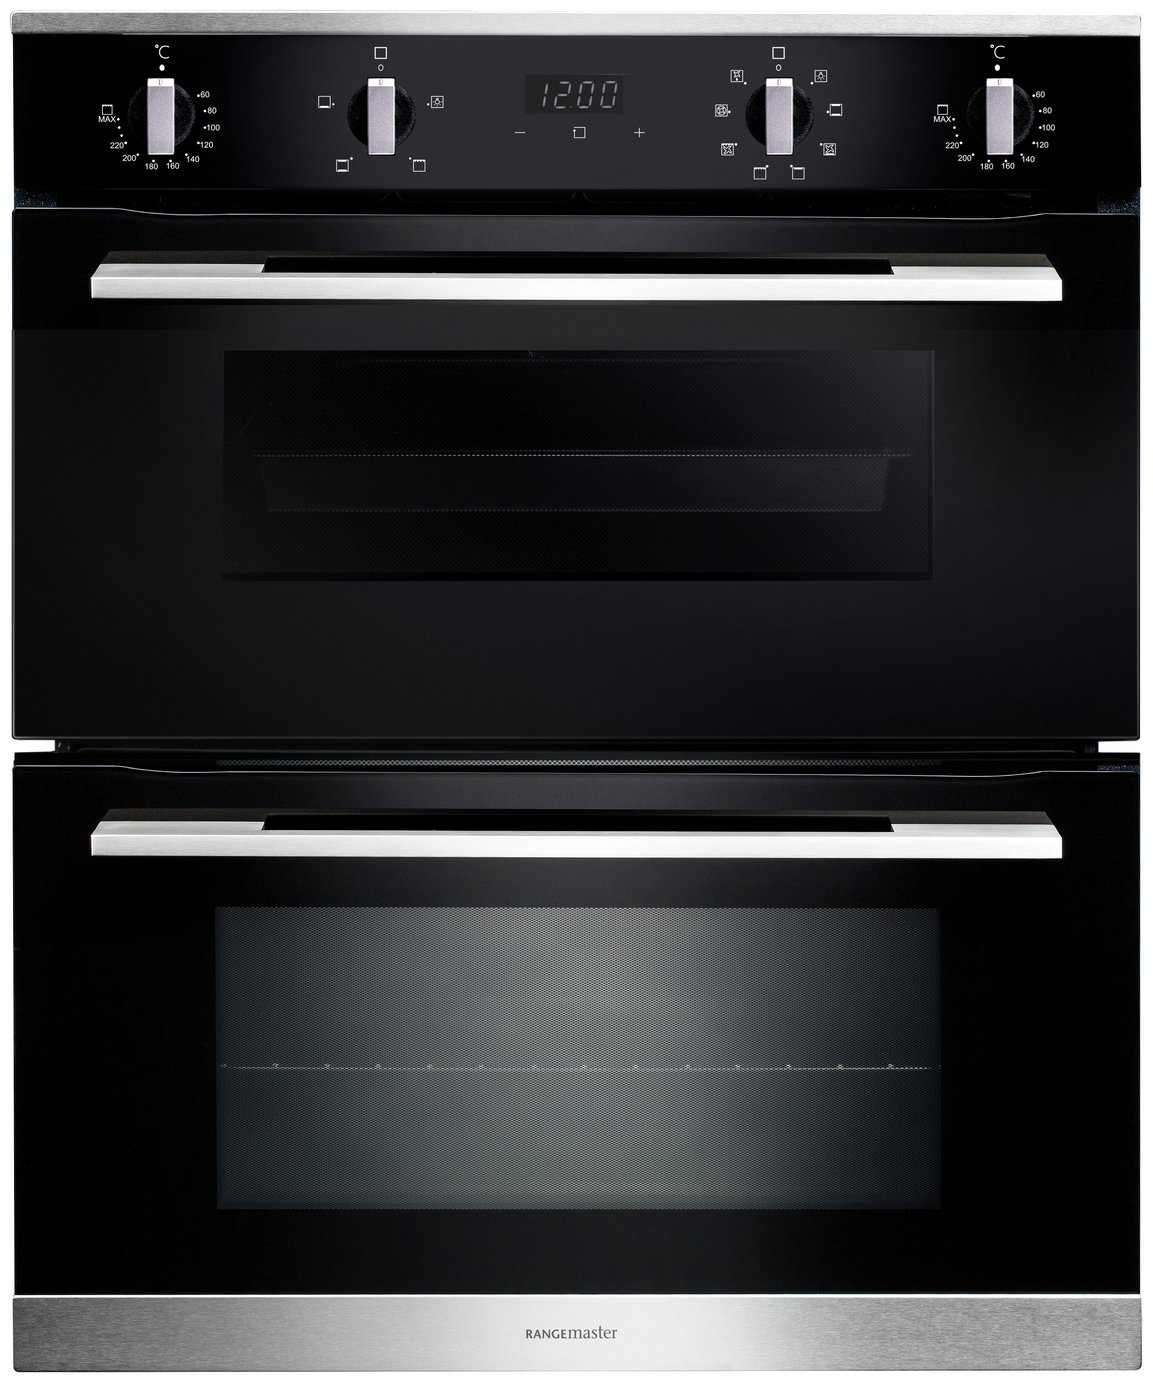 Rangemaster RMB7248BL/SS Built Under Double Electric Oven